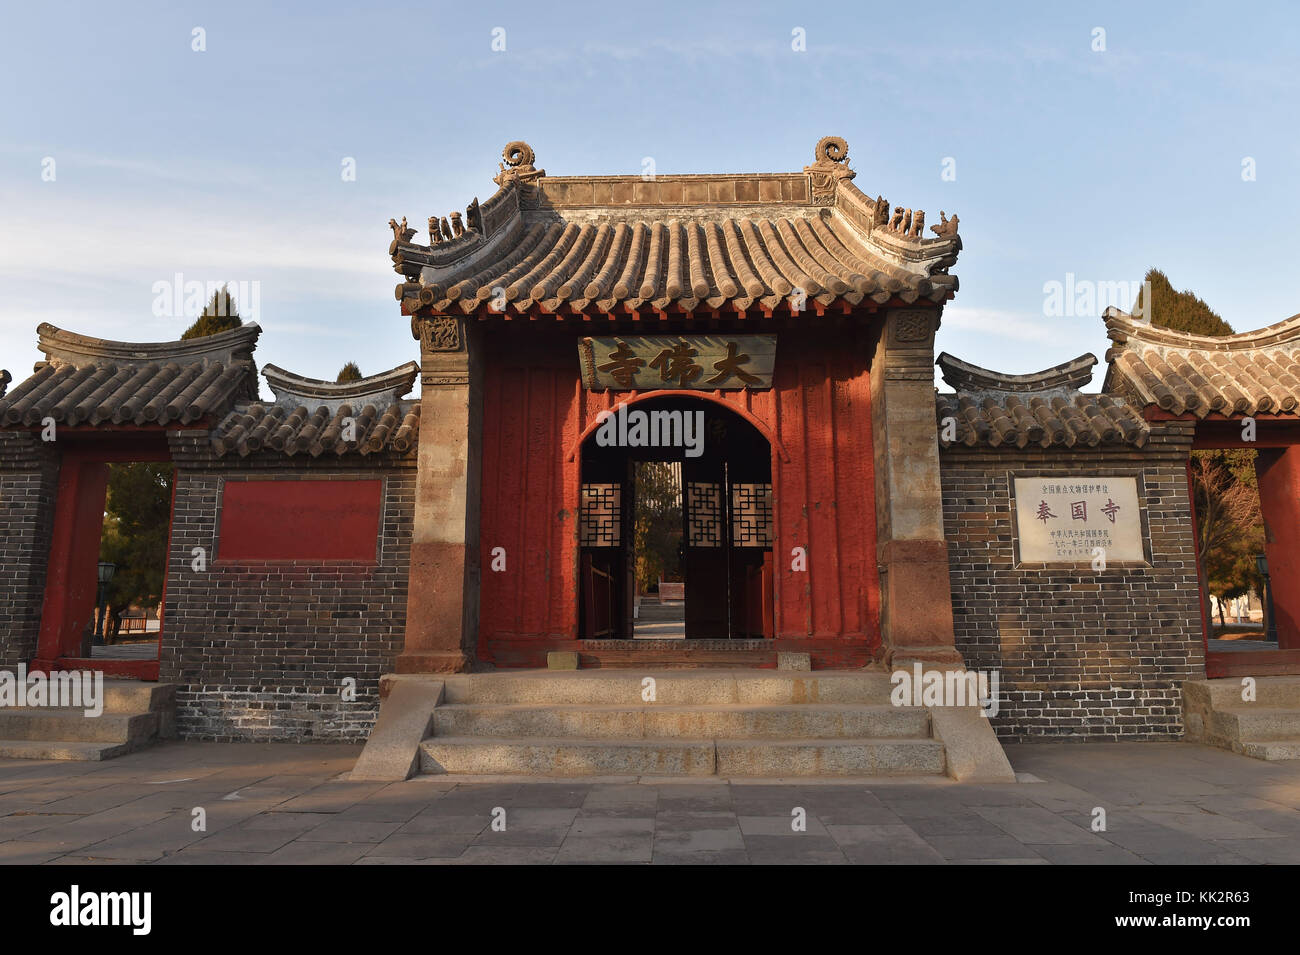 1. Discover history along the Silk Route in China